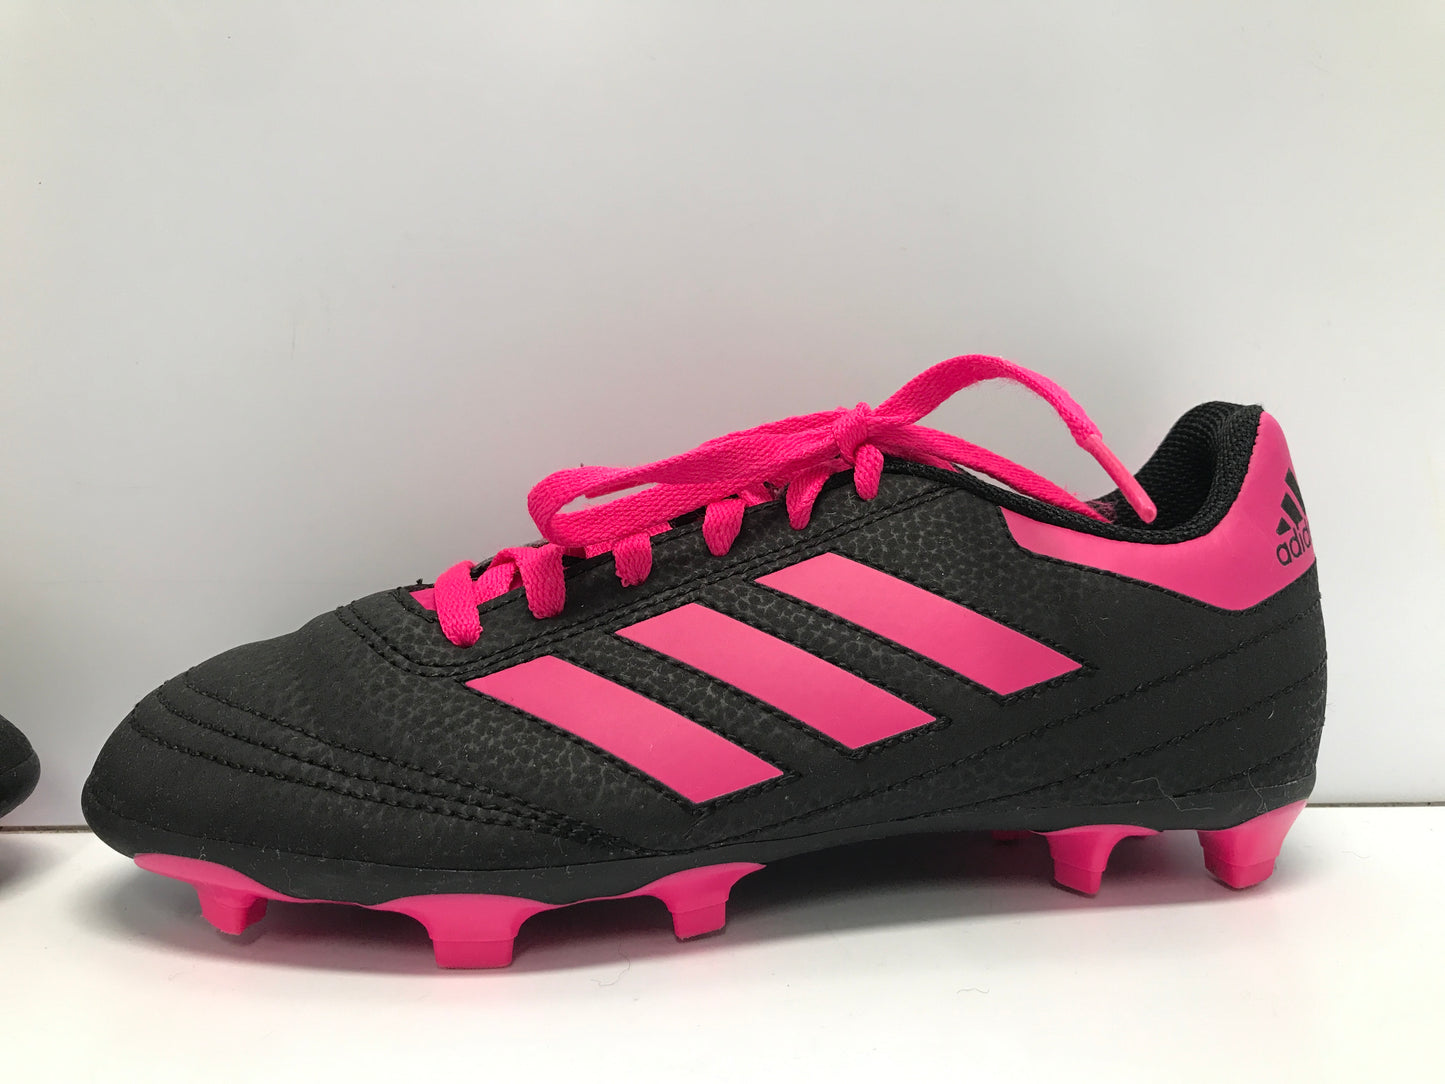 Soccer Shoes Cleats Child 2.5 Adidas Black Pink Minor Wear